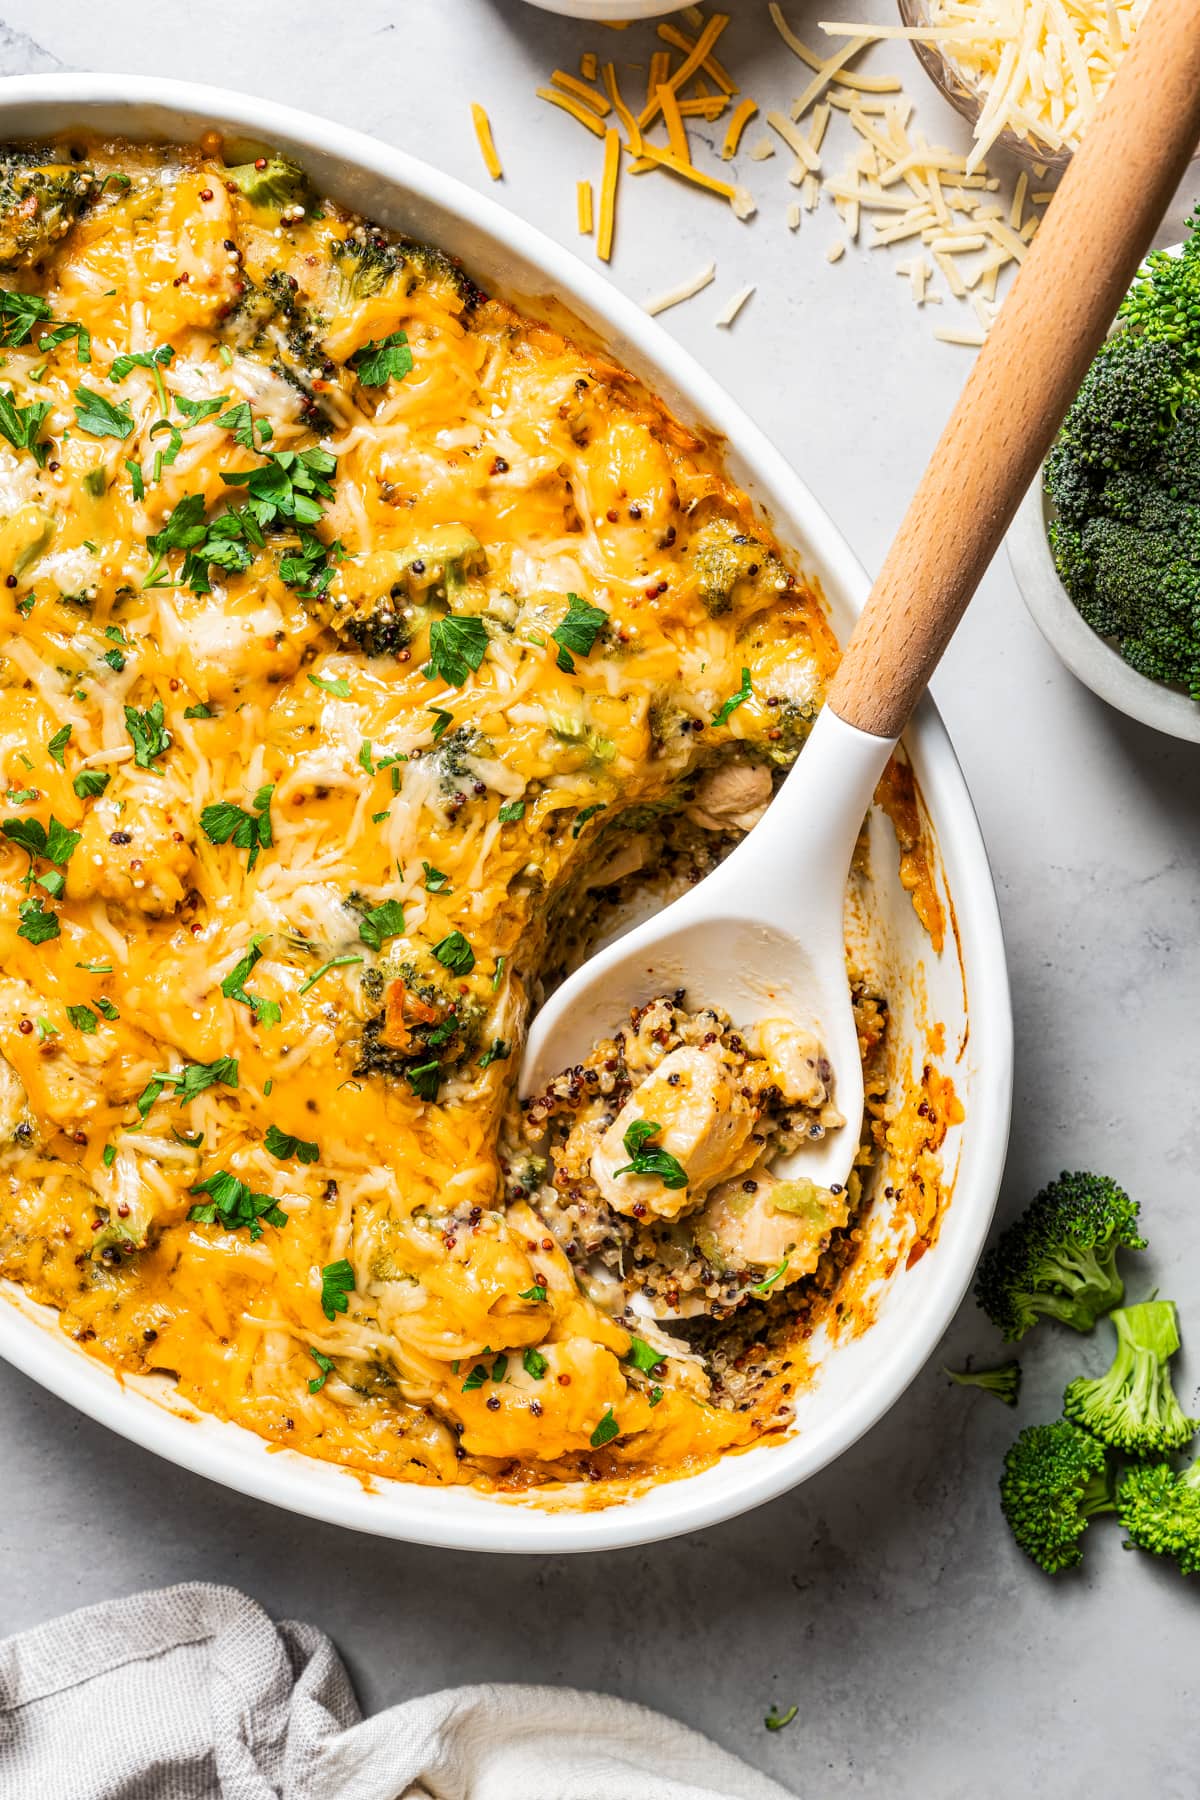 A serving spoon scooping out Chicken and broccoli from a casserole dish.